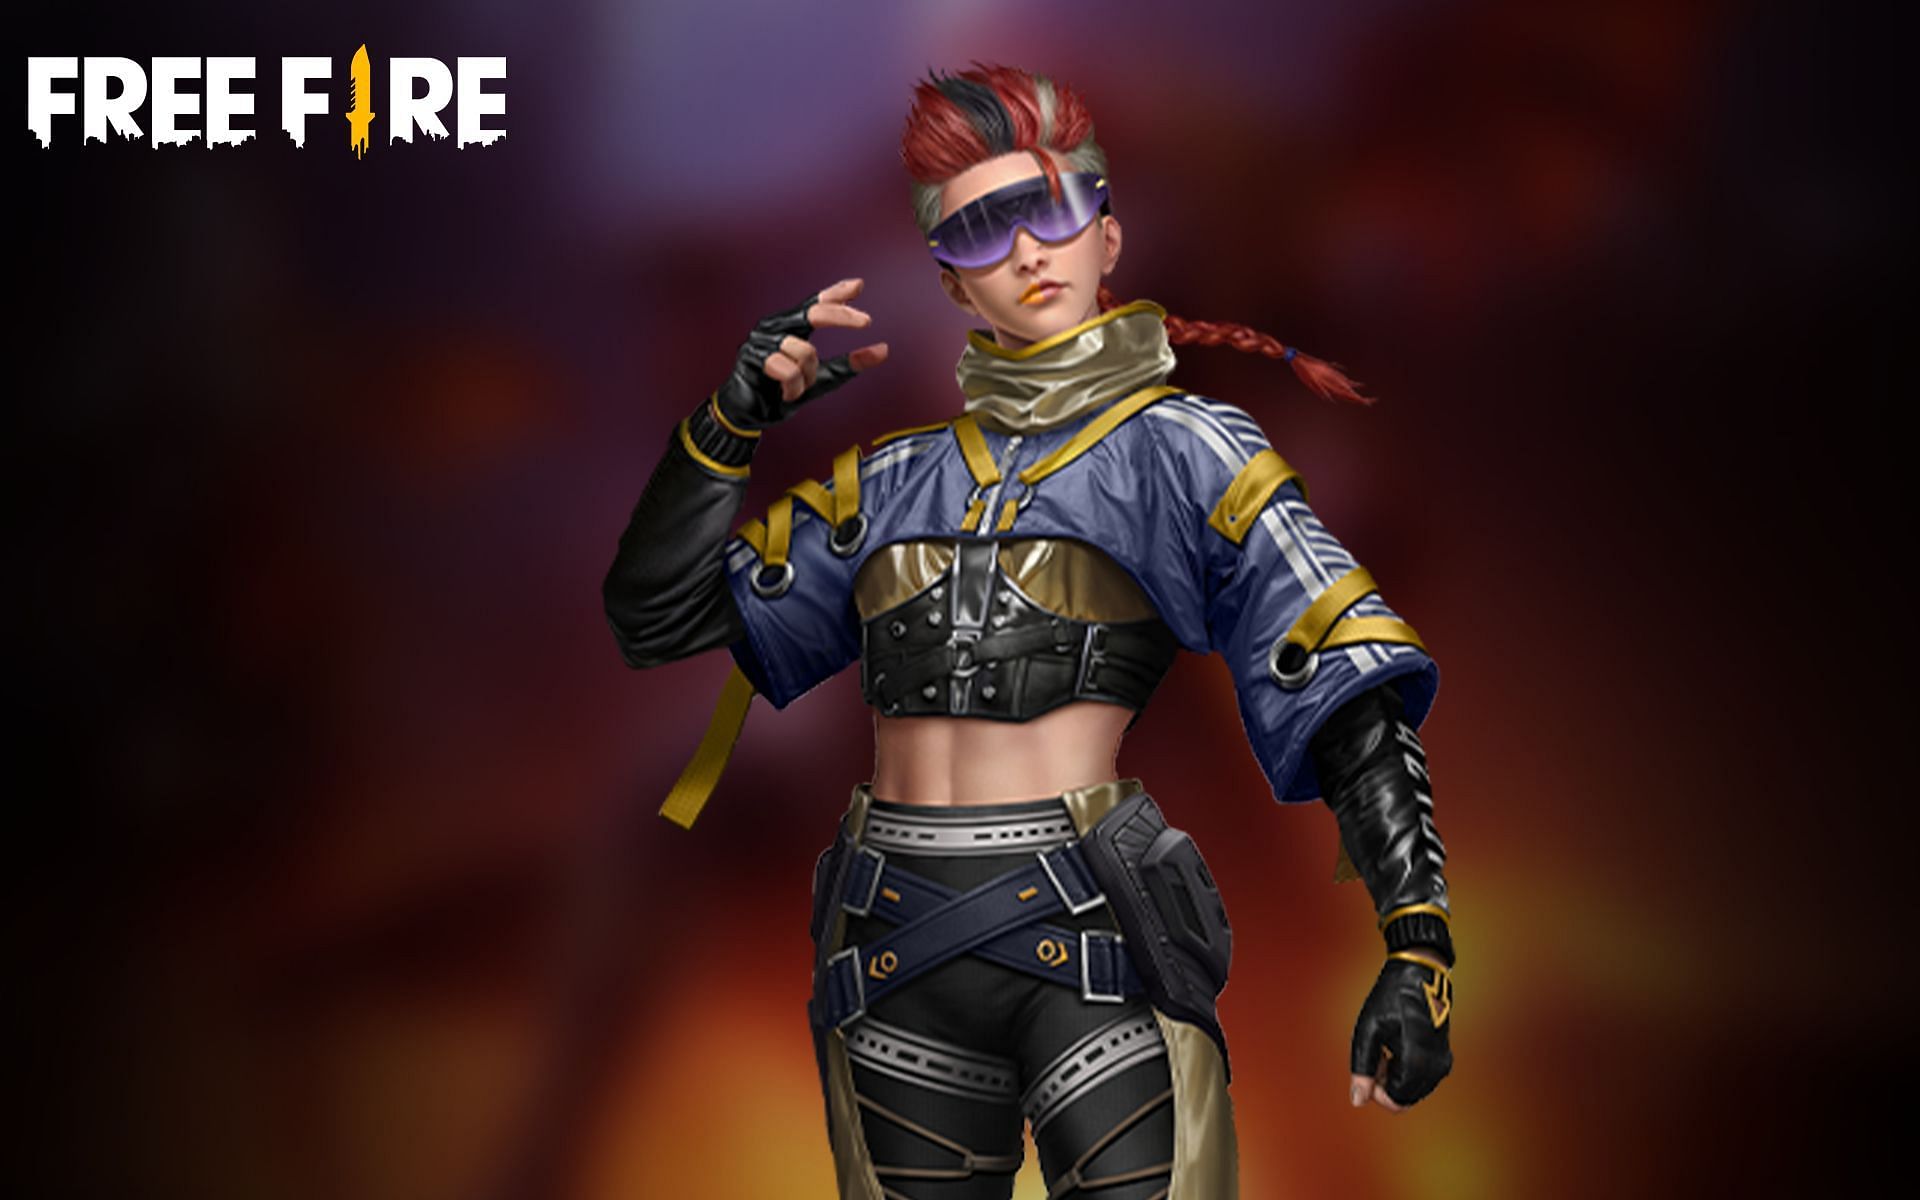 With the right pets, Xayne character can perform even better in Free Fire (Image via Sportskeeda)